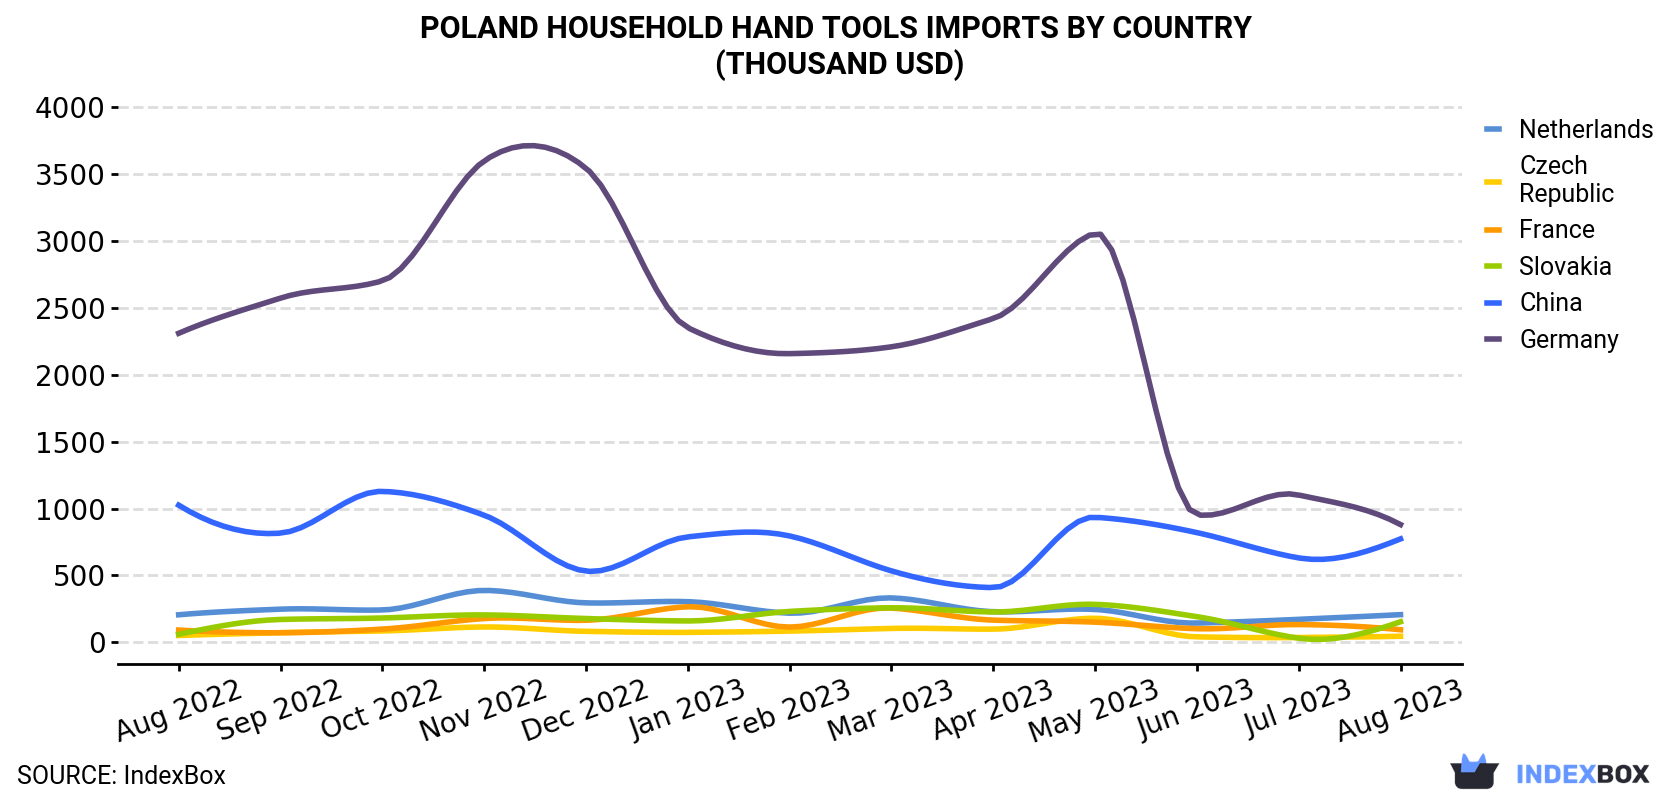 Poland Household Hand Tools Imports By Country (Thousand USD)